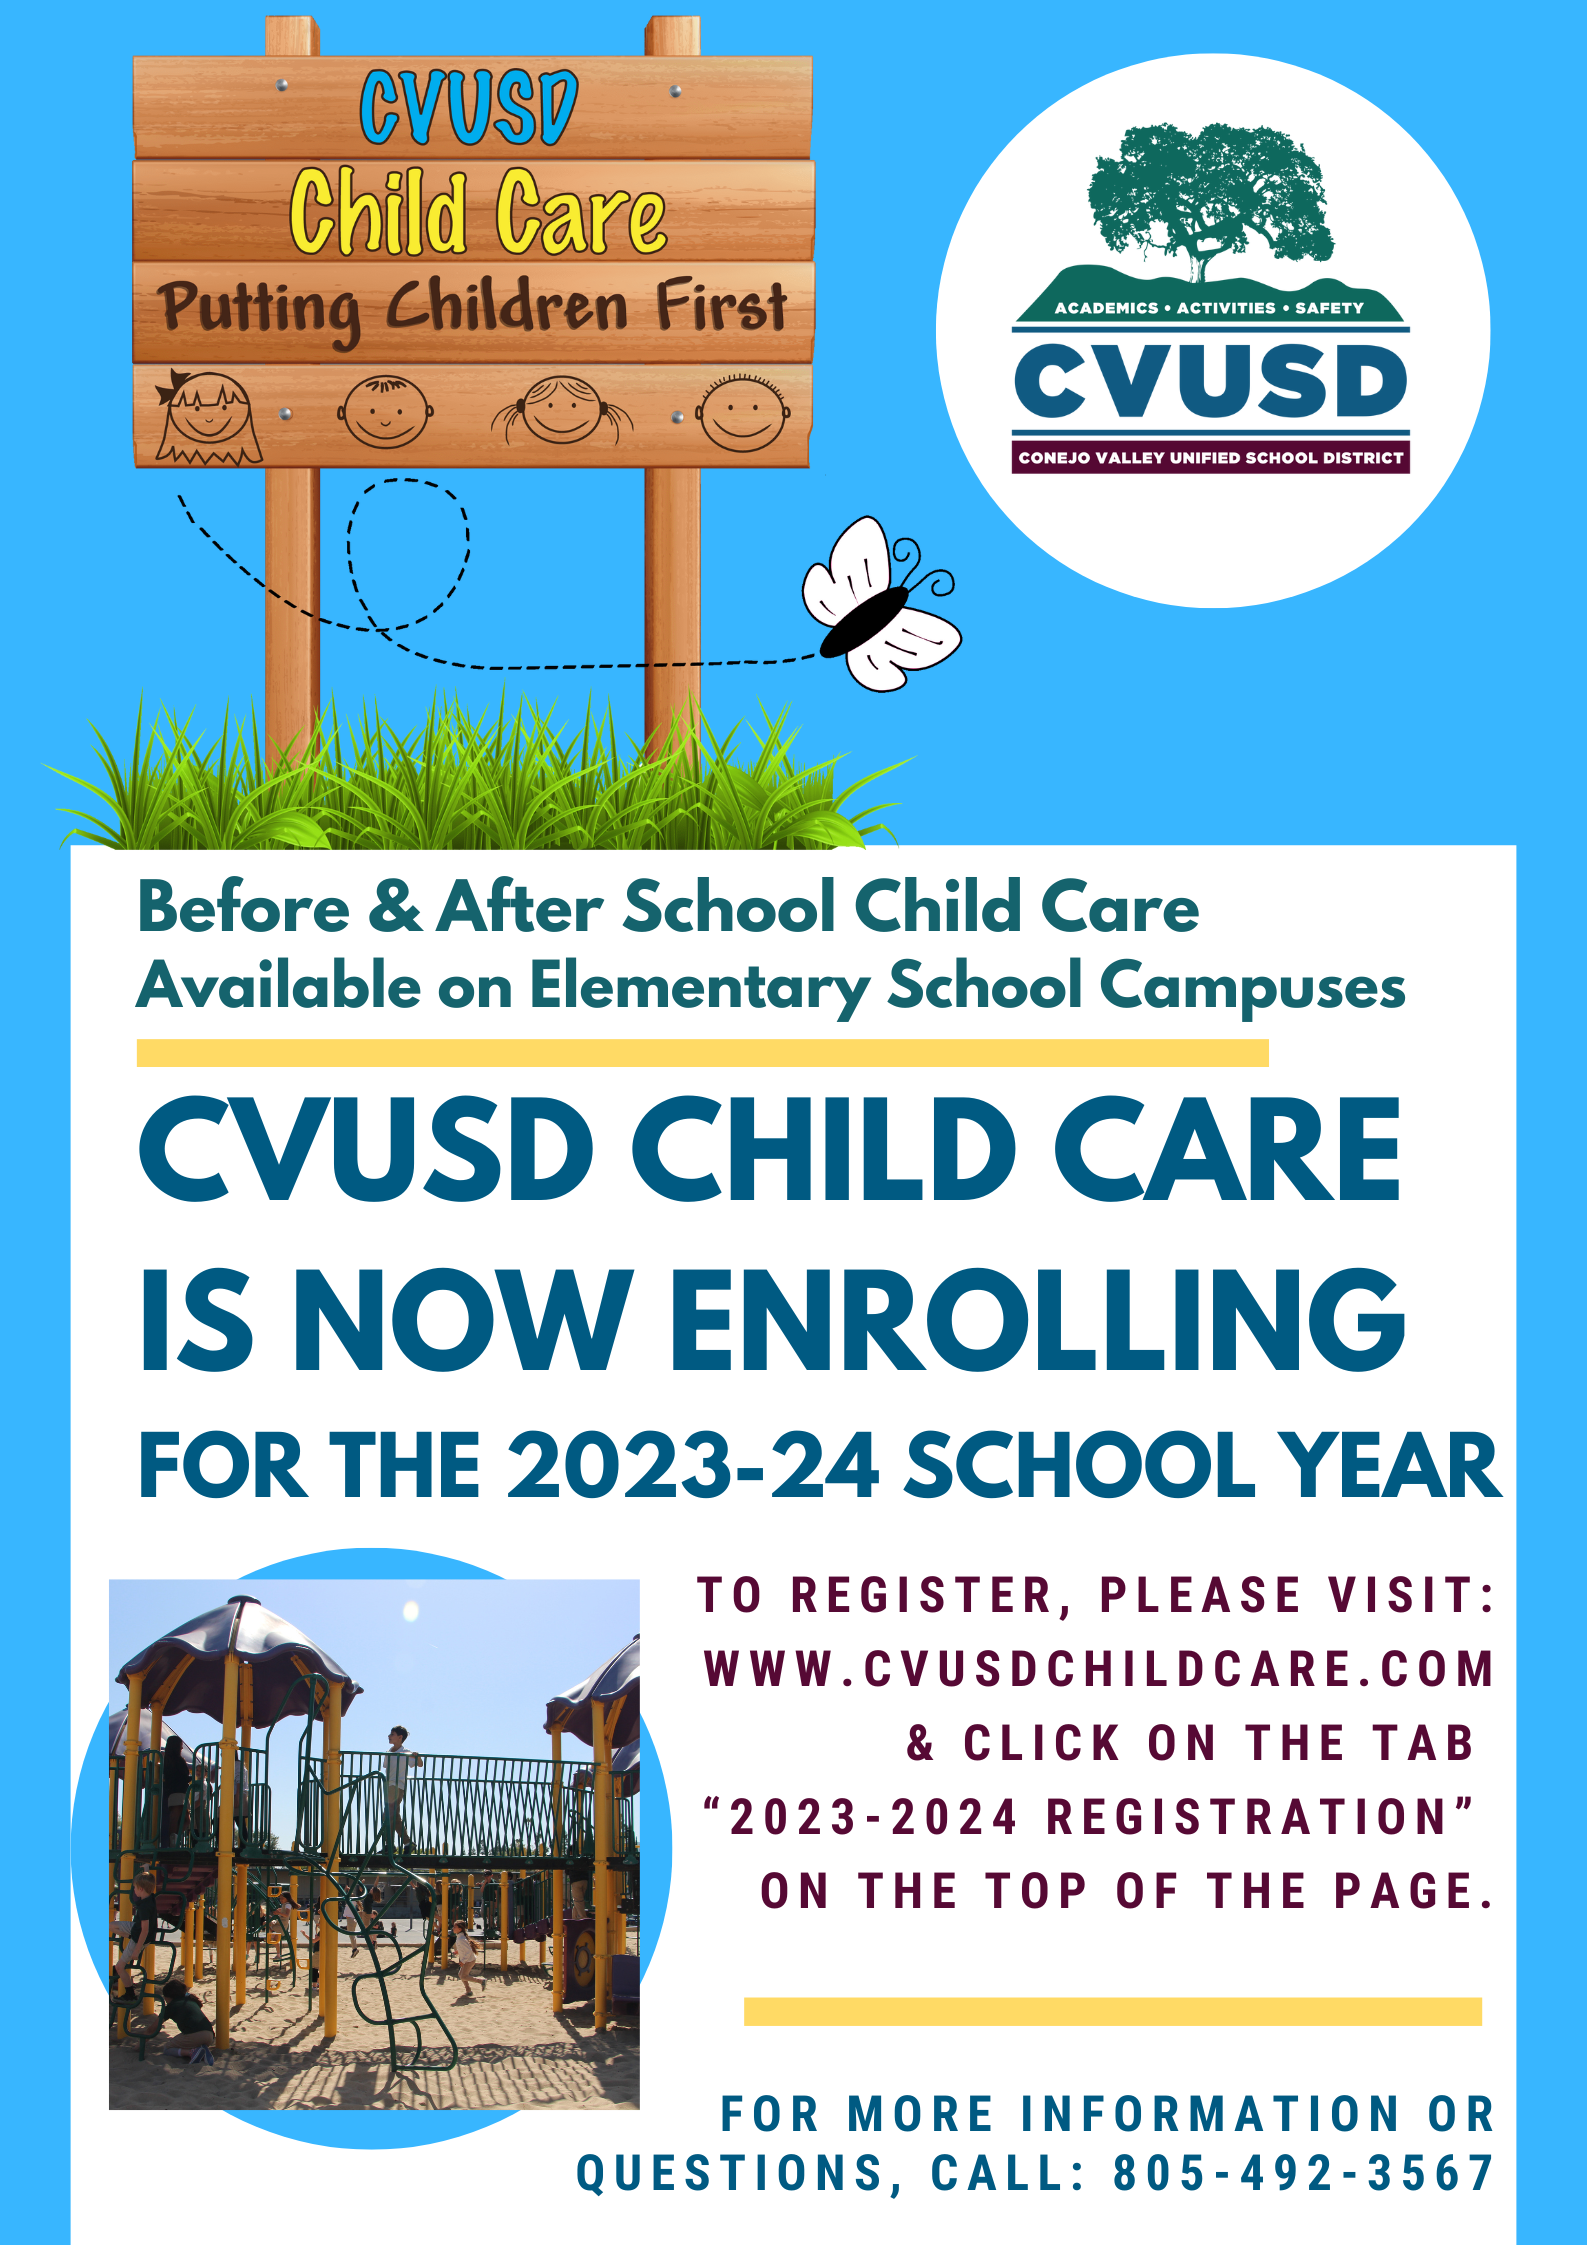 CVUSD Child Care Registration is Now Open